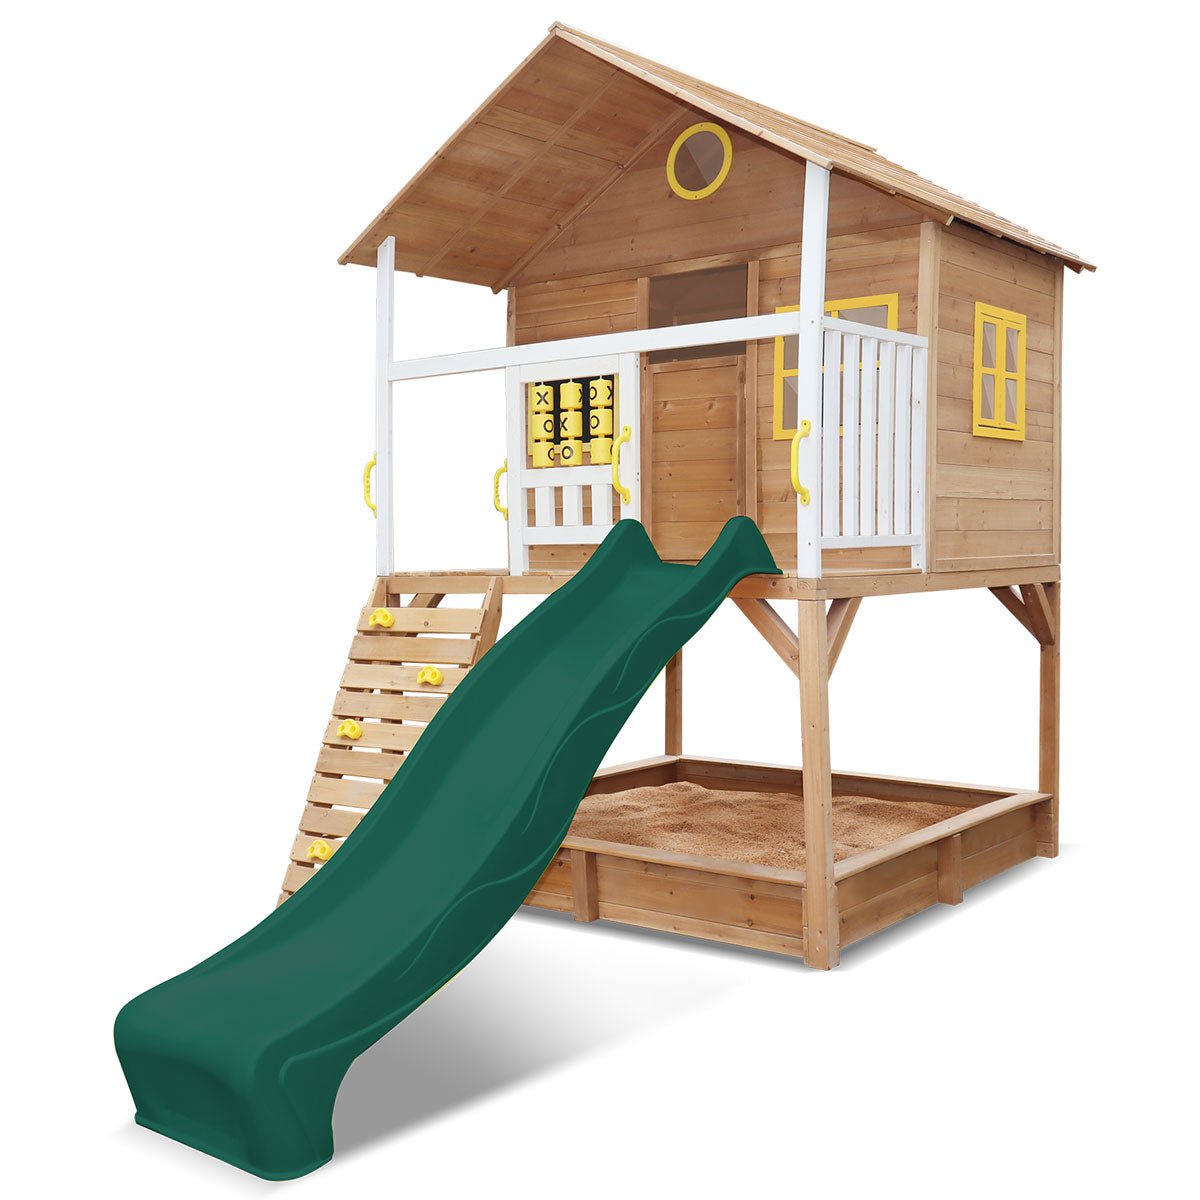 Warrigal Cubby House with Green Slide: Active Outdoor Play for Children